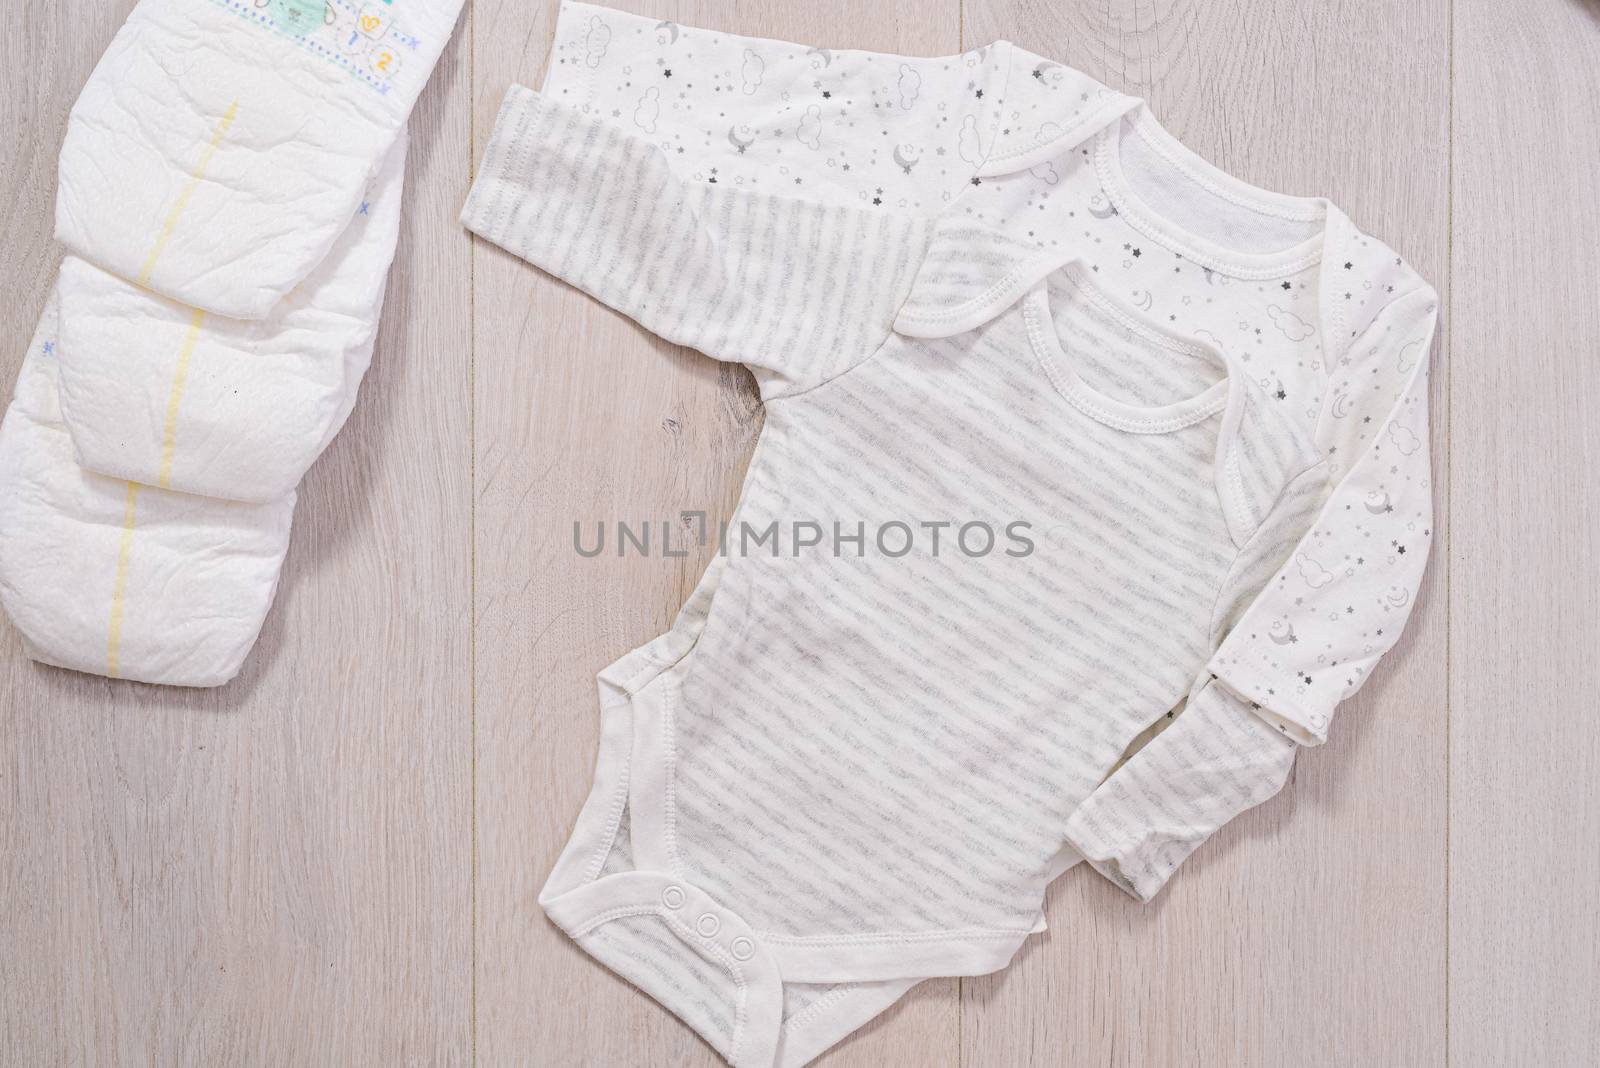 white baby clothes and diapers on wooden background. newborn by jcdiazhidalgo